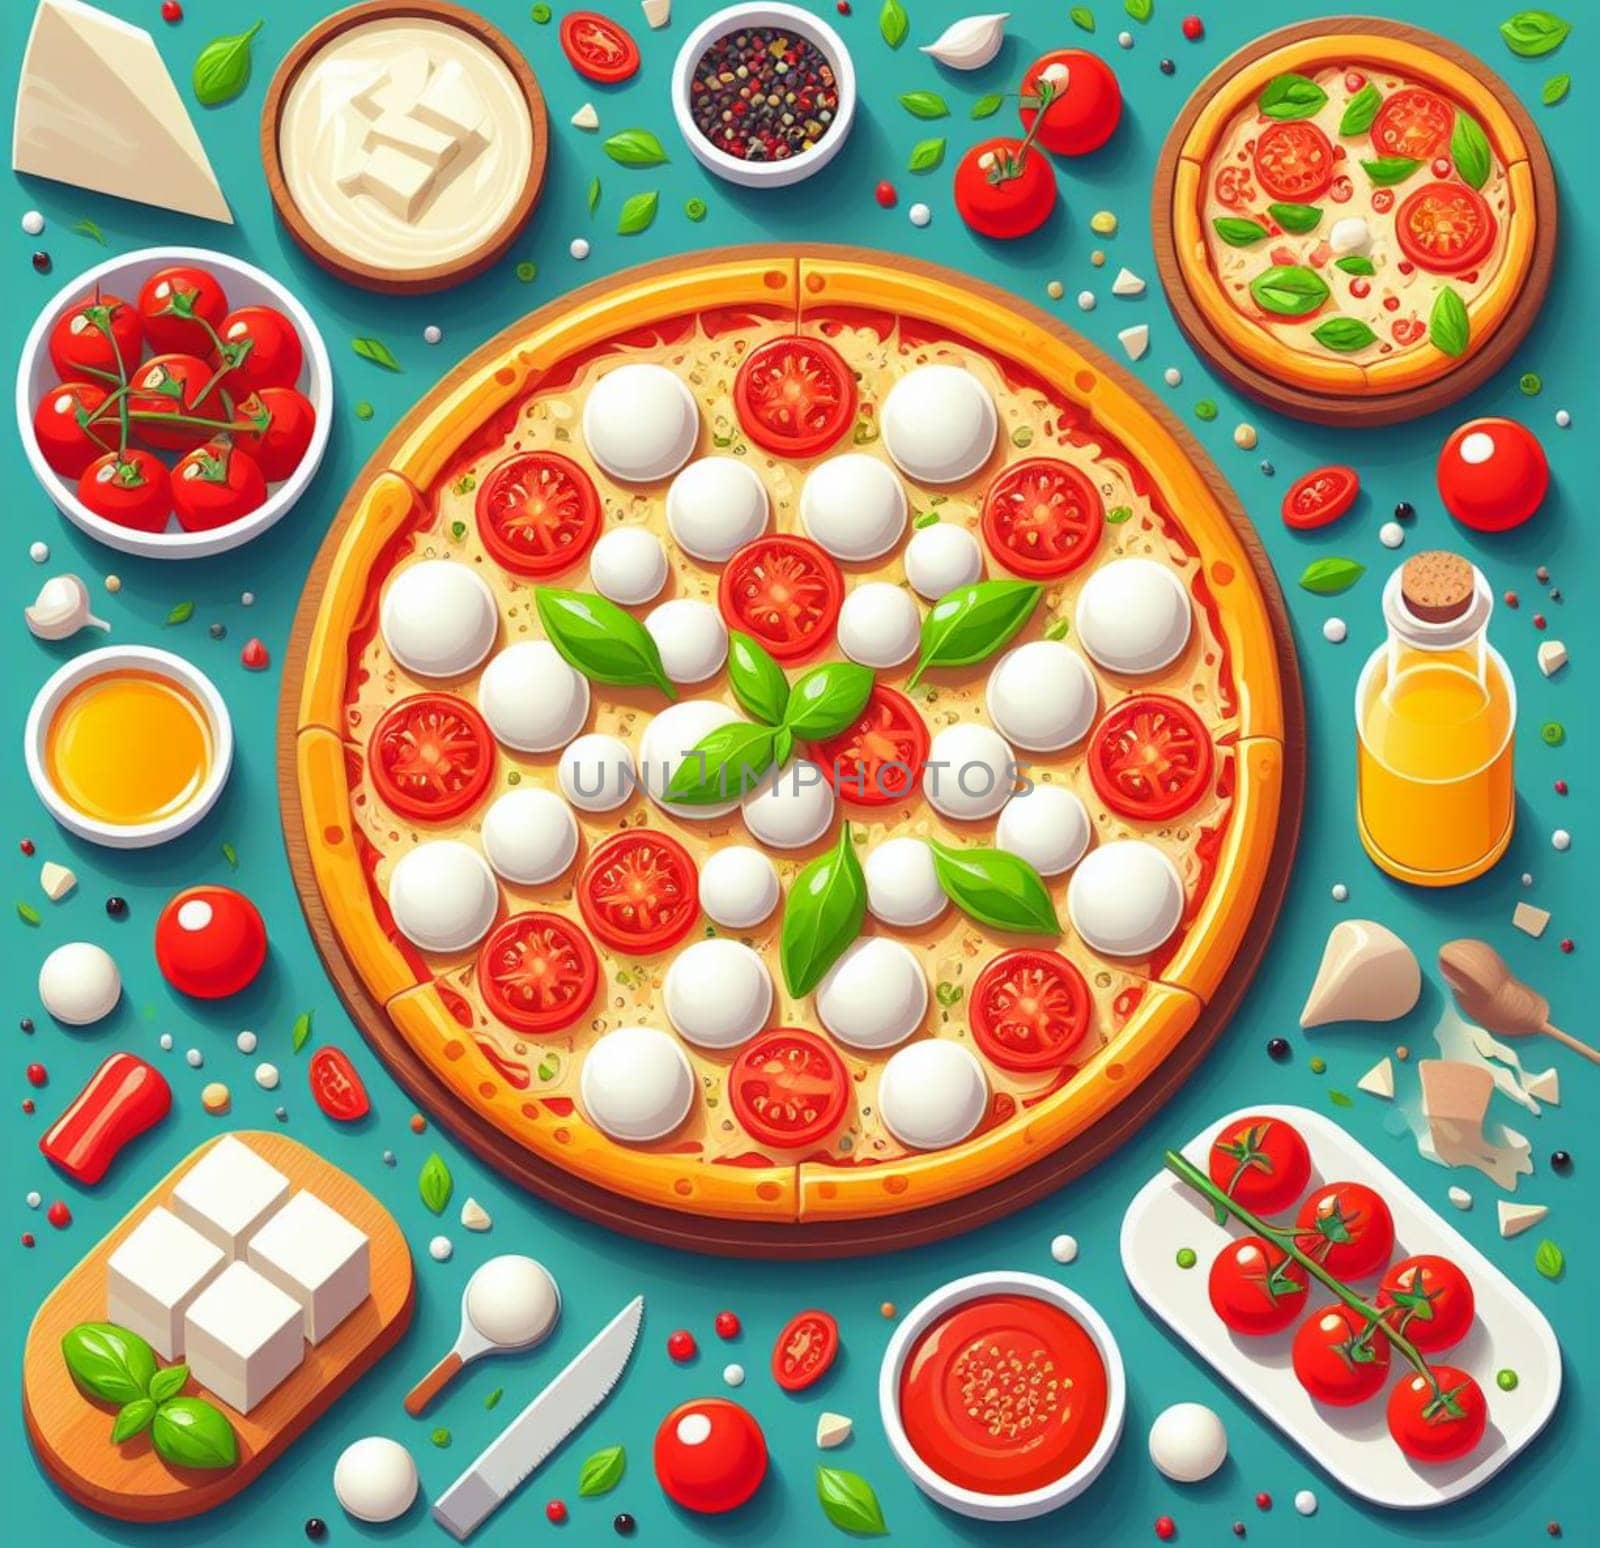 lay flat melted mozzarella cheese tomato and basil pizza ready to eat illustration by verbano